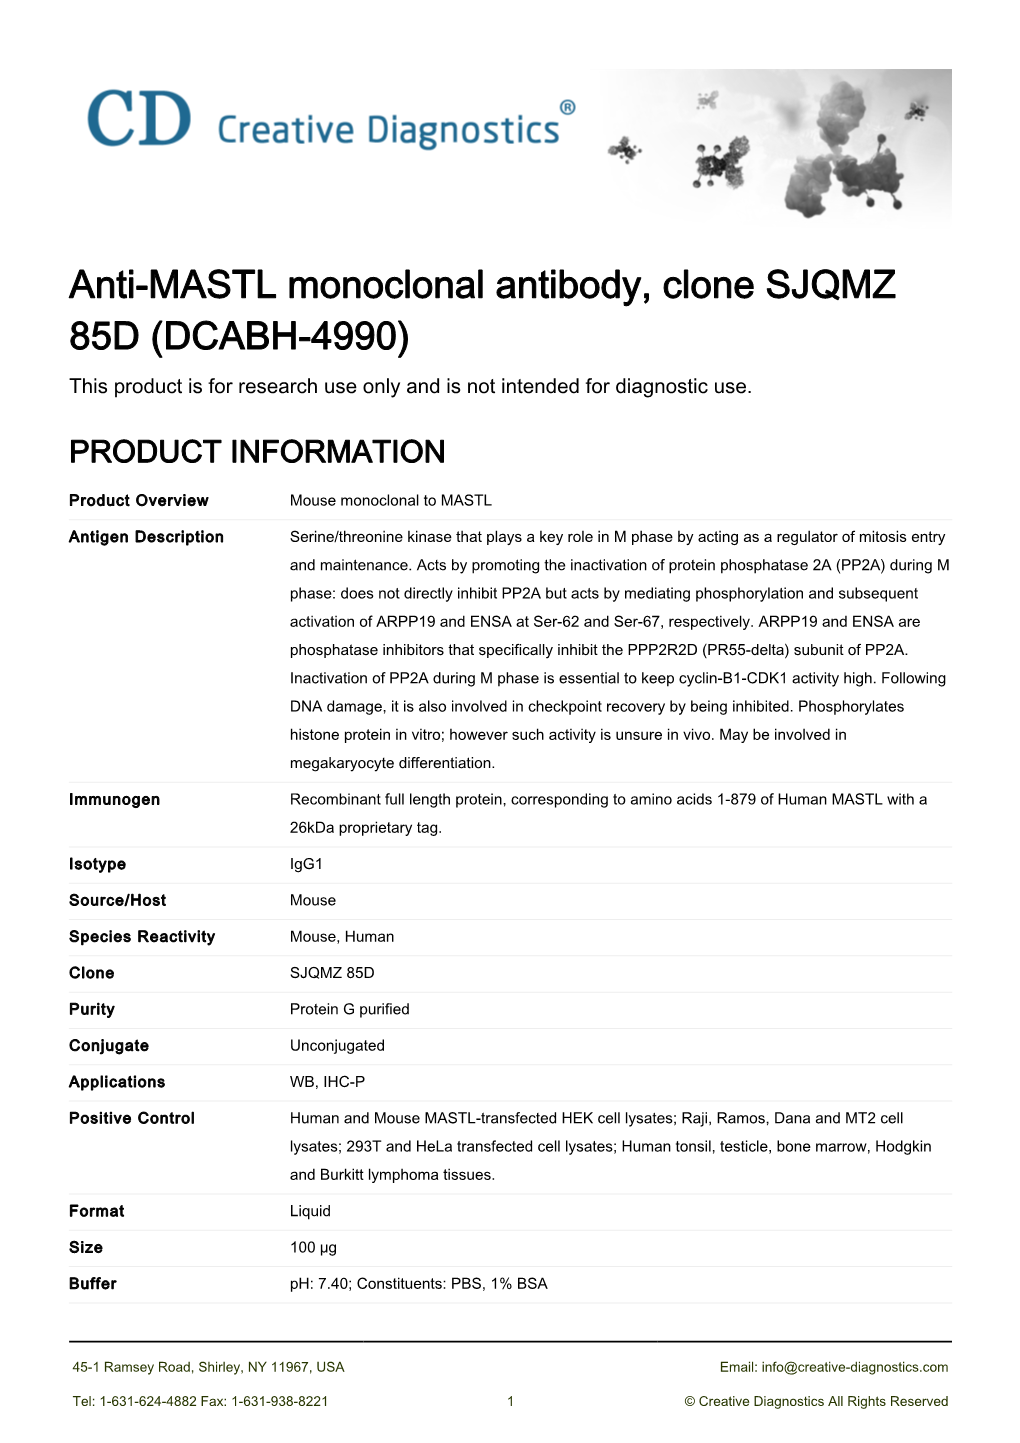 Anti-MASTL Monoclonal Antibody, Clone SJQMZ 85D (DCABH-4990) This Product Is for Research Use Only and Is Not Intended for Diagnostic Use